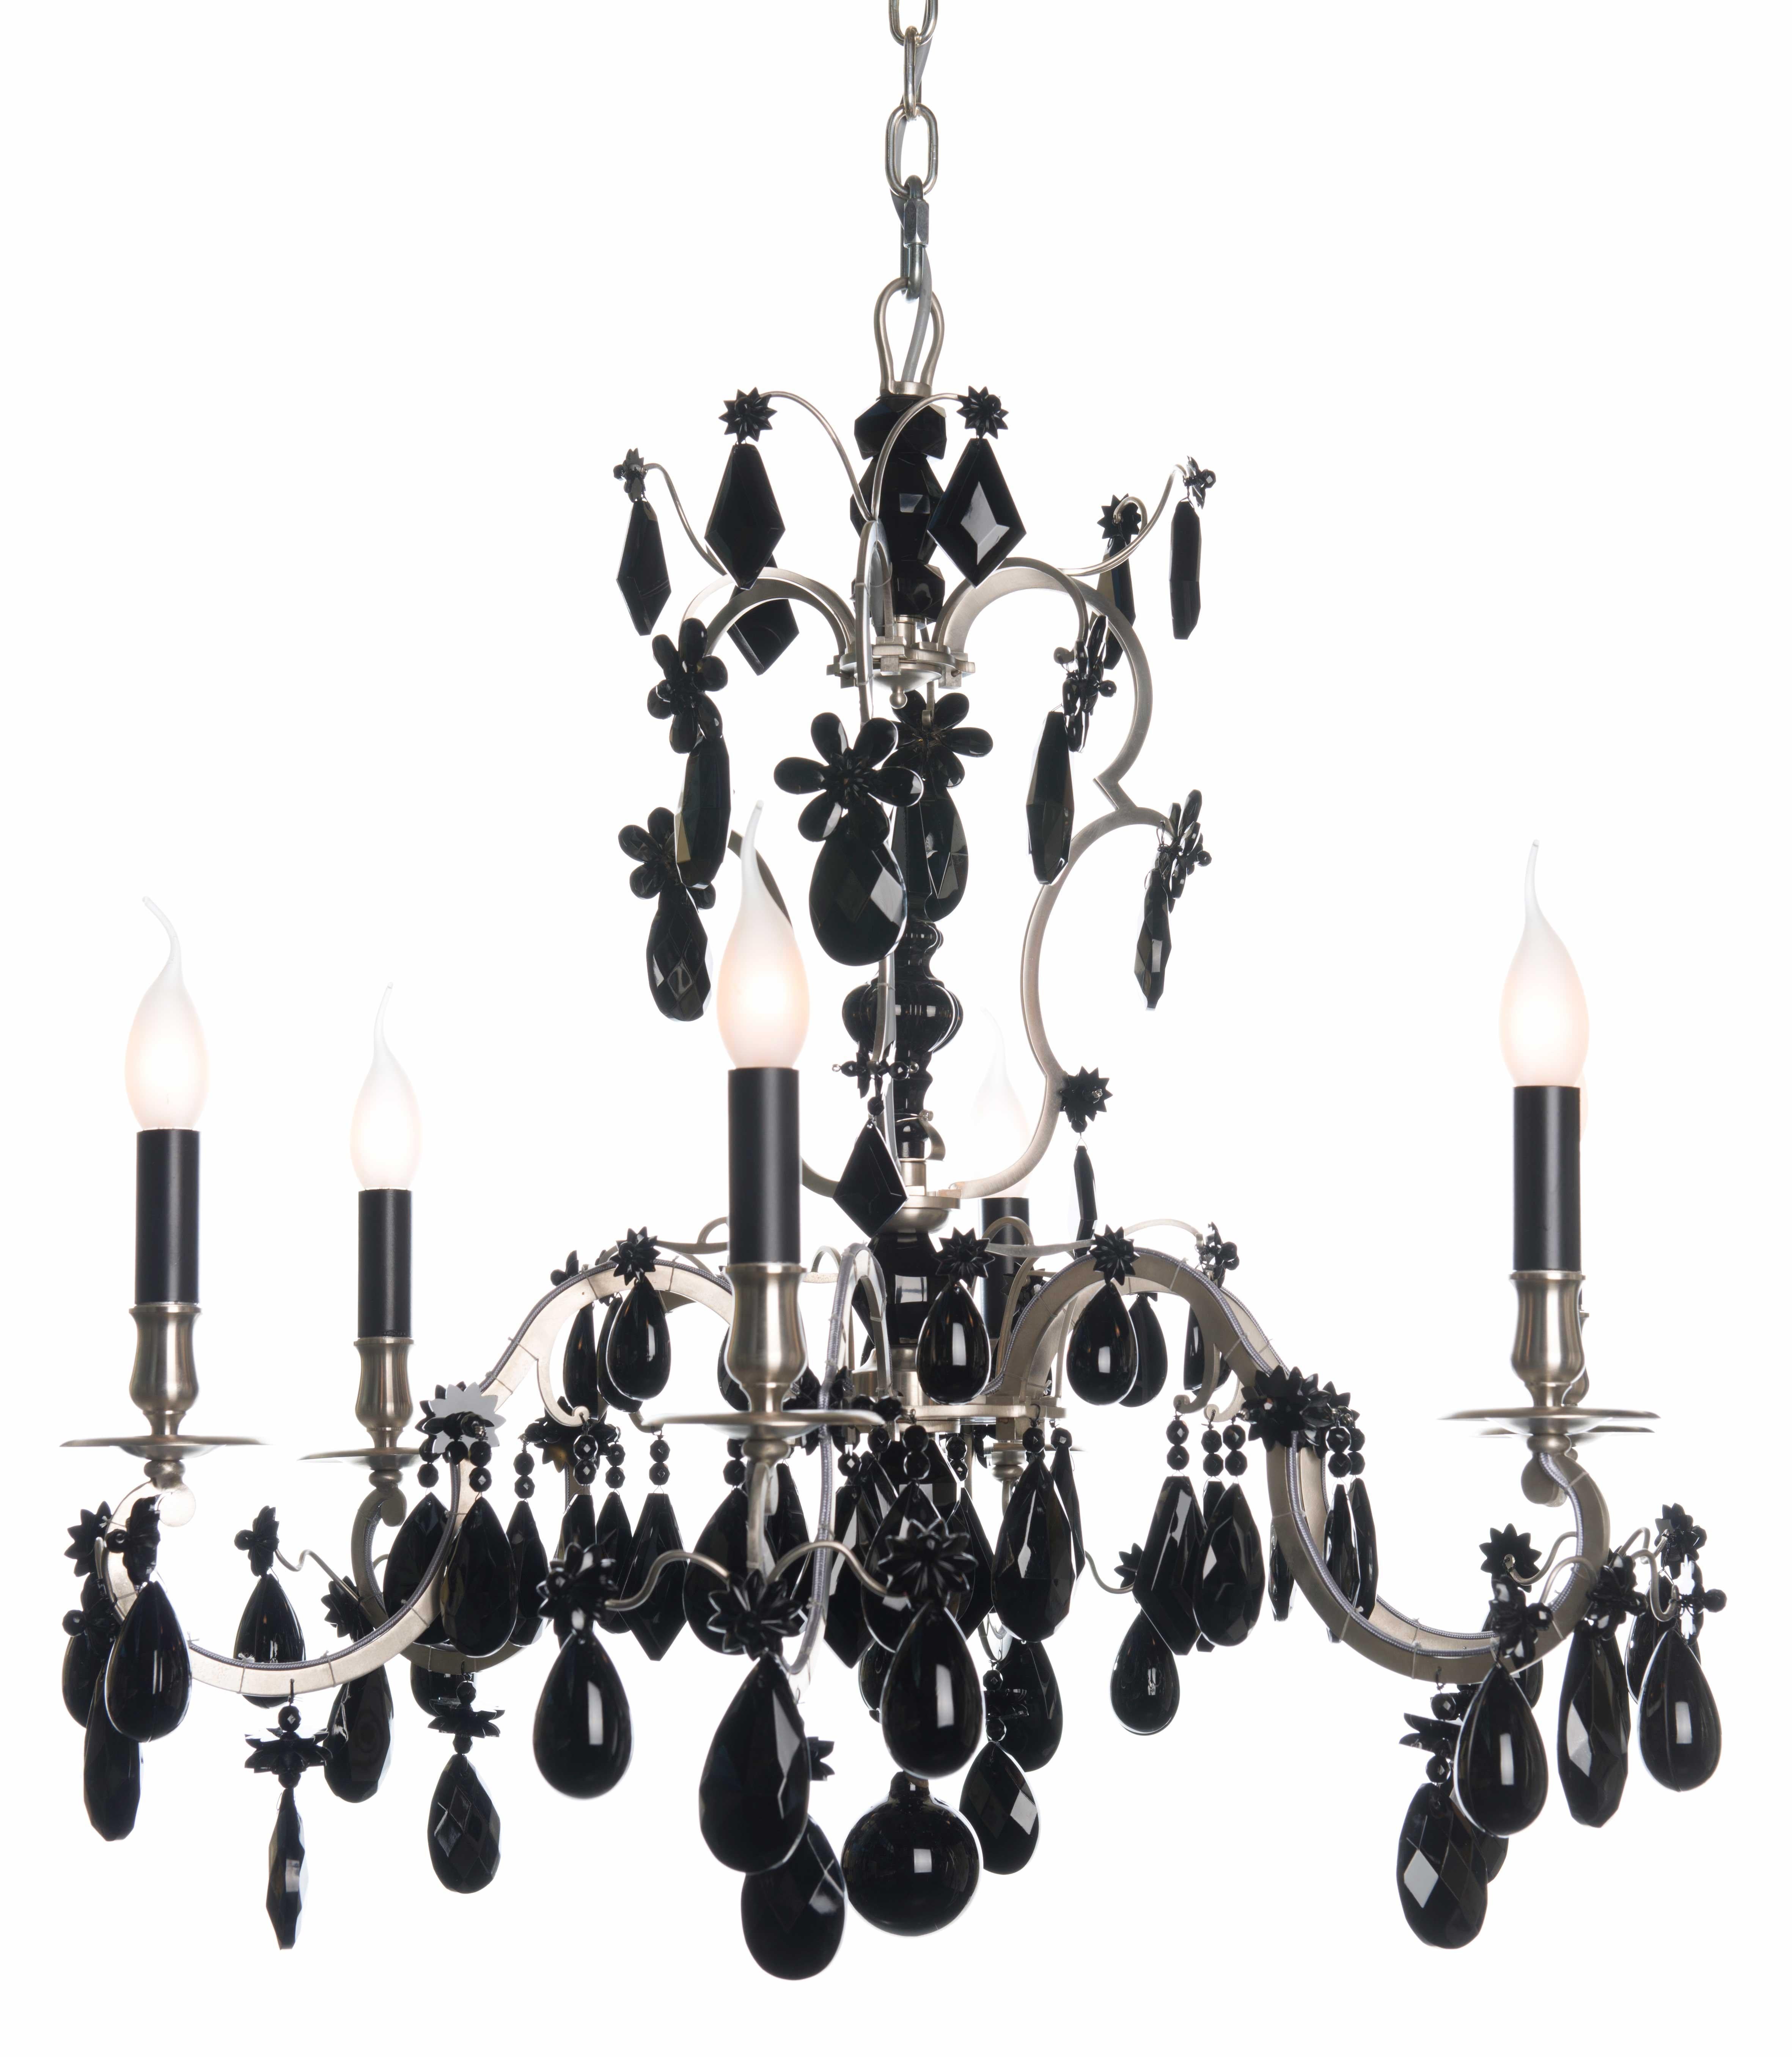 LU-BR-14710-06 Maison Baguès chandelier, 6 lights.
Various finish possible: polished brass, satin brass, polished nickel, satin nickel, dark patina, black patina (shown on picture here), oil rubbed bronze, gold, 24k nitrate gold.
Bronze and